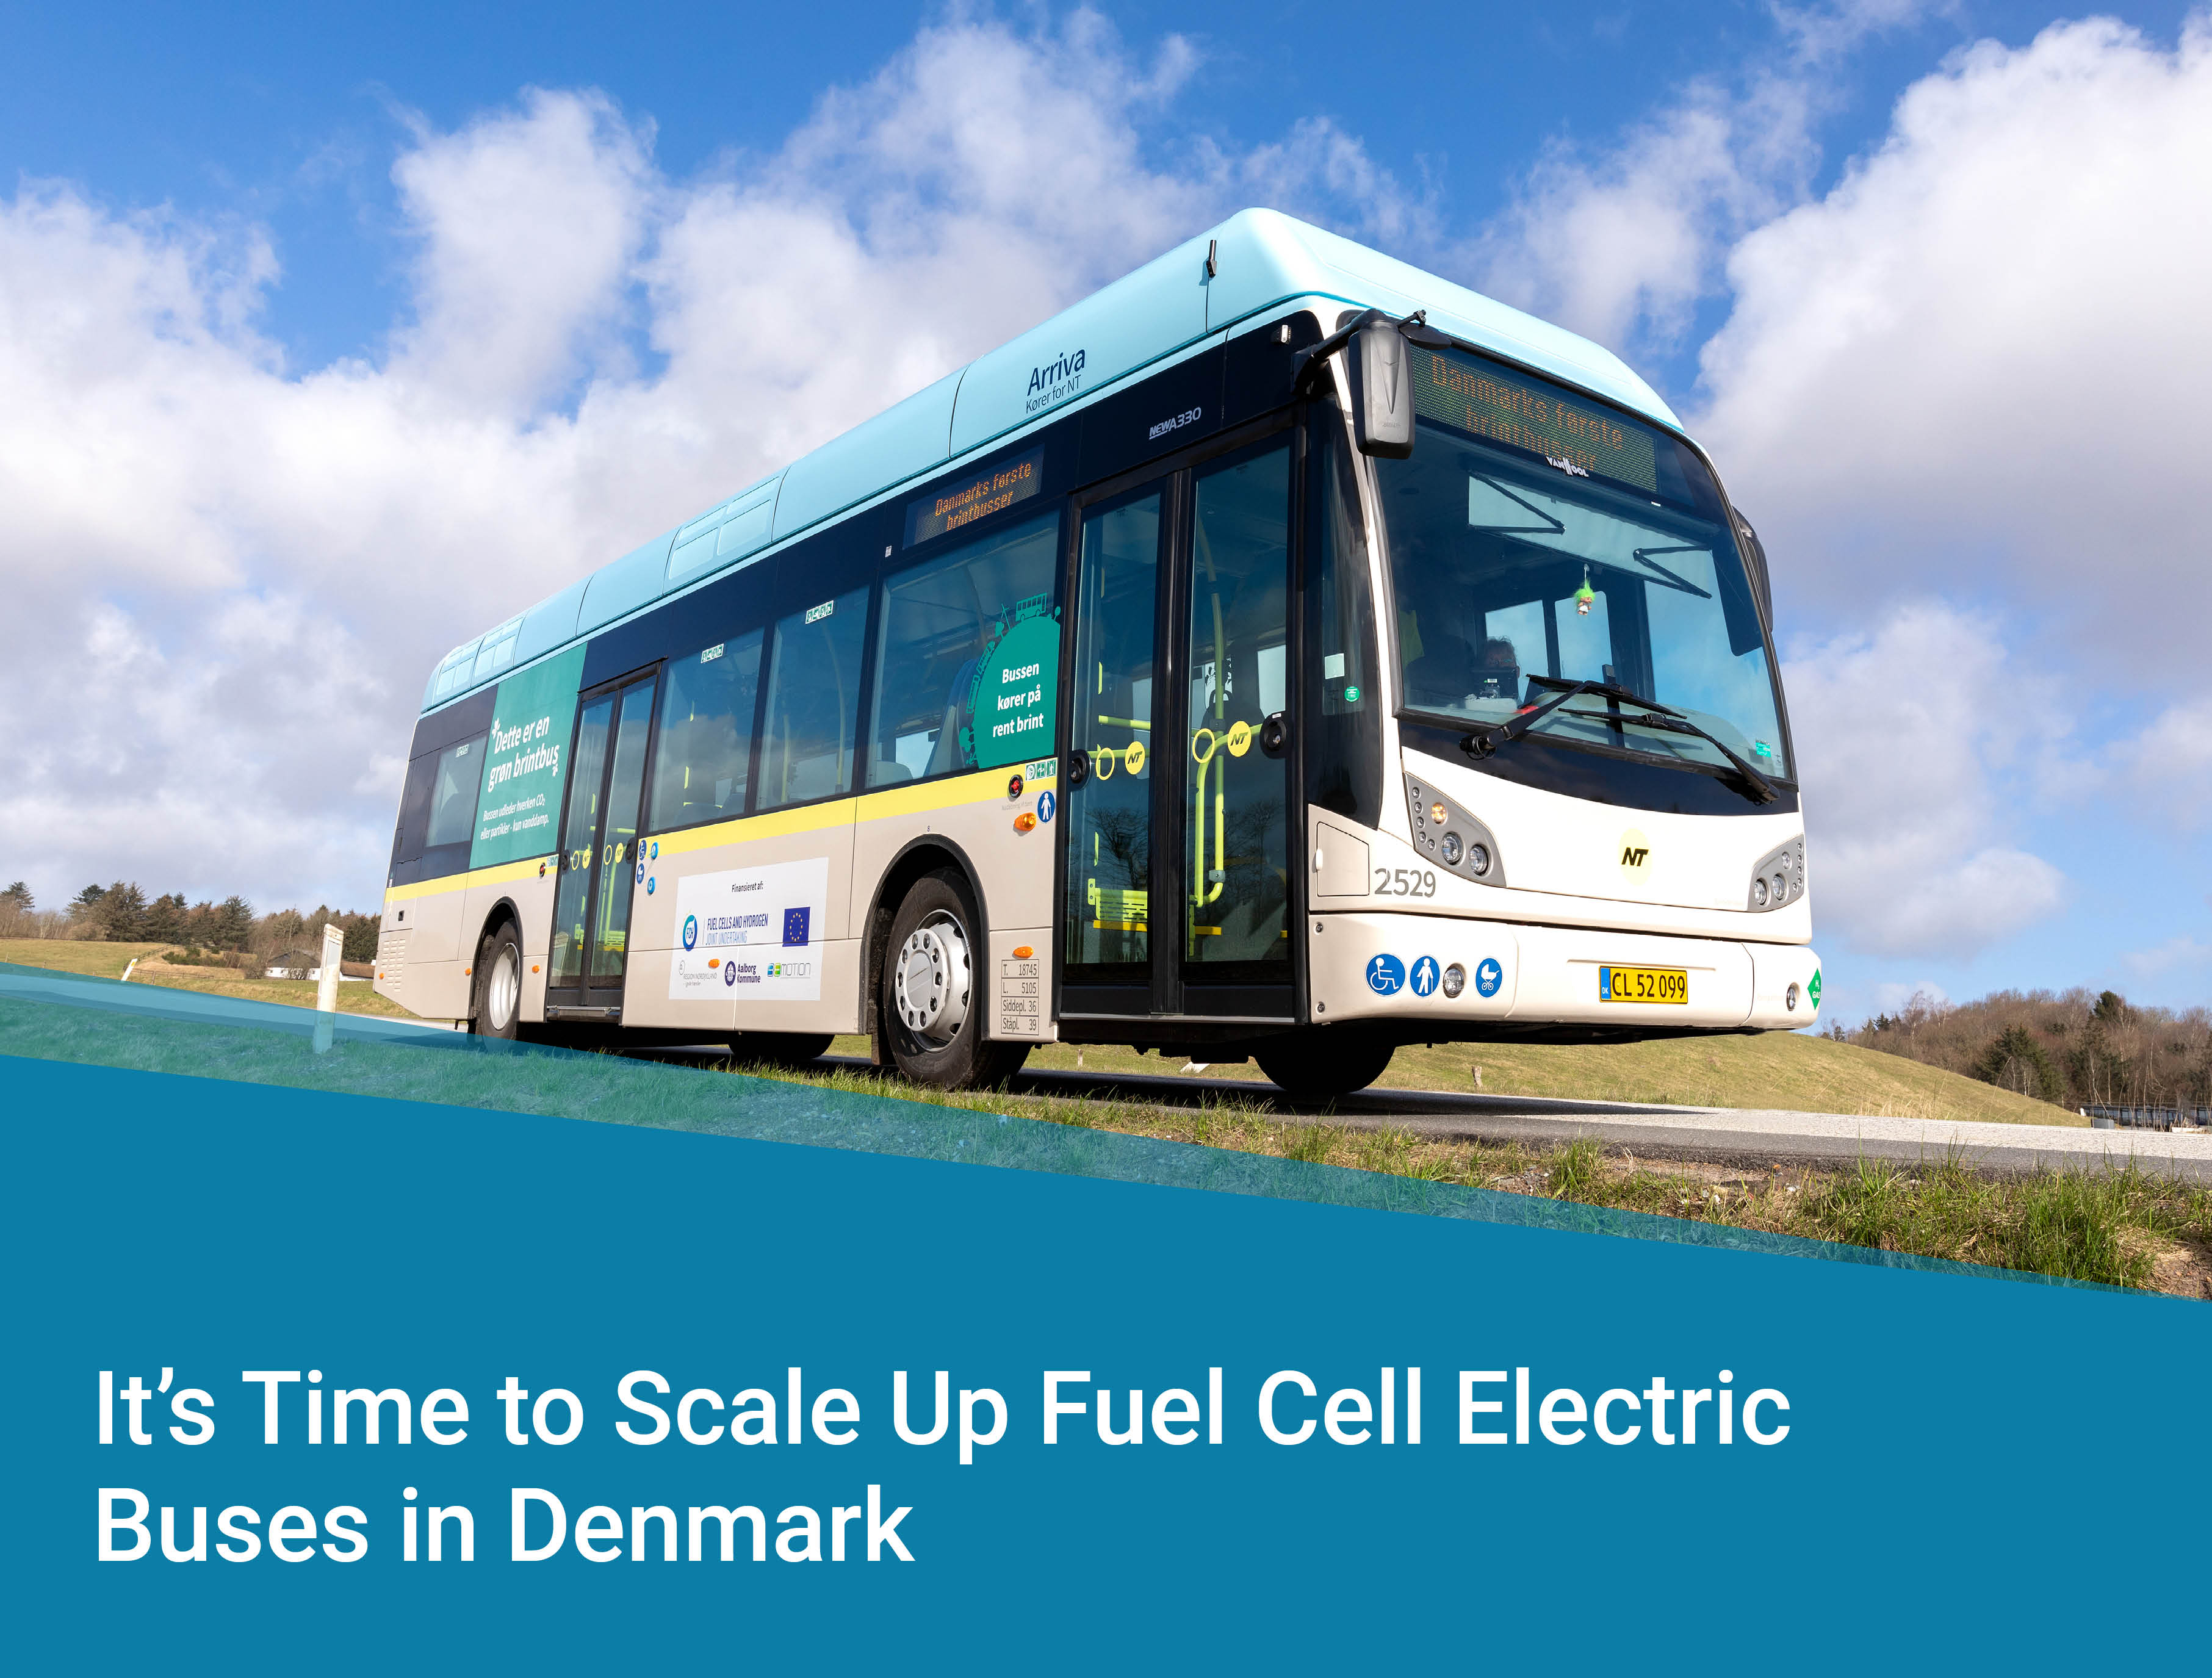 It’s Time to Scale Up Fuel Cell Electric Buses in Denmark